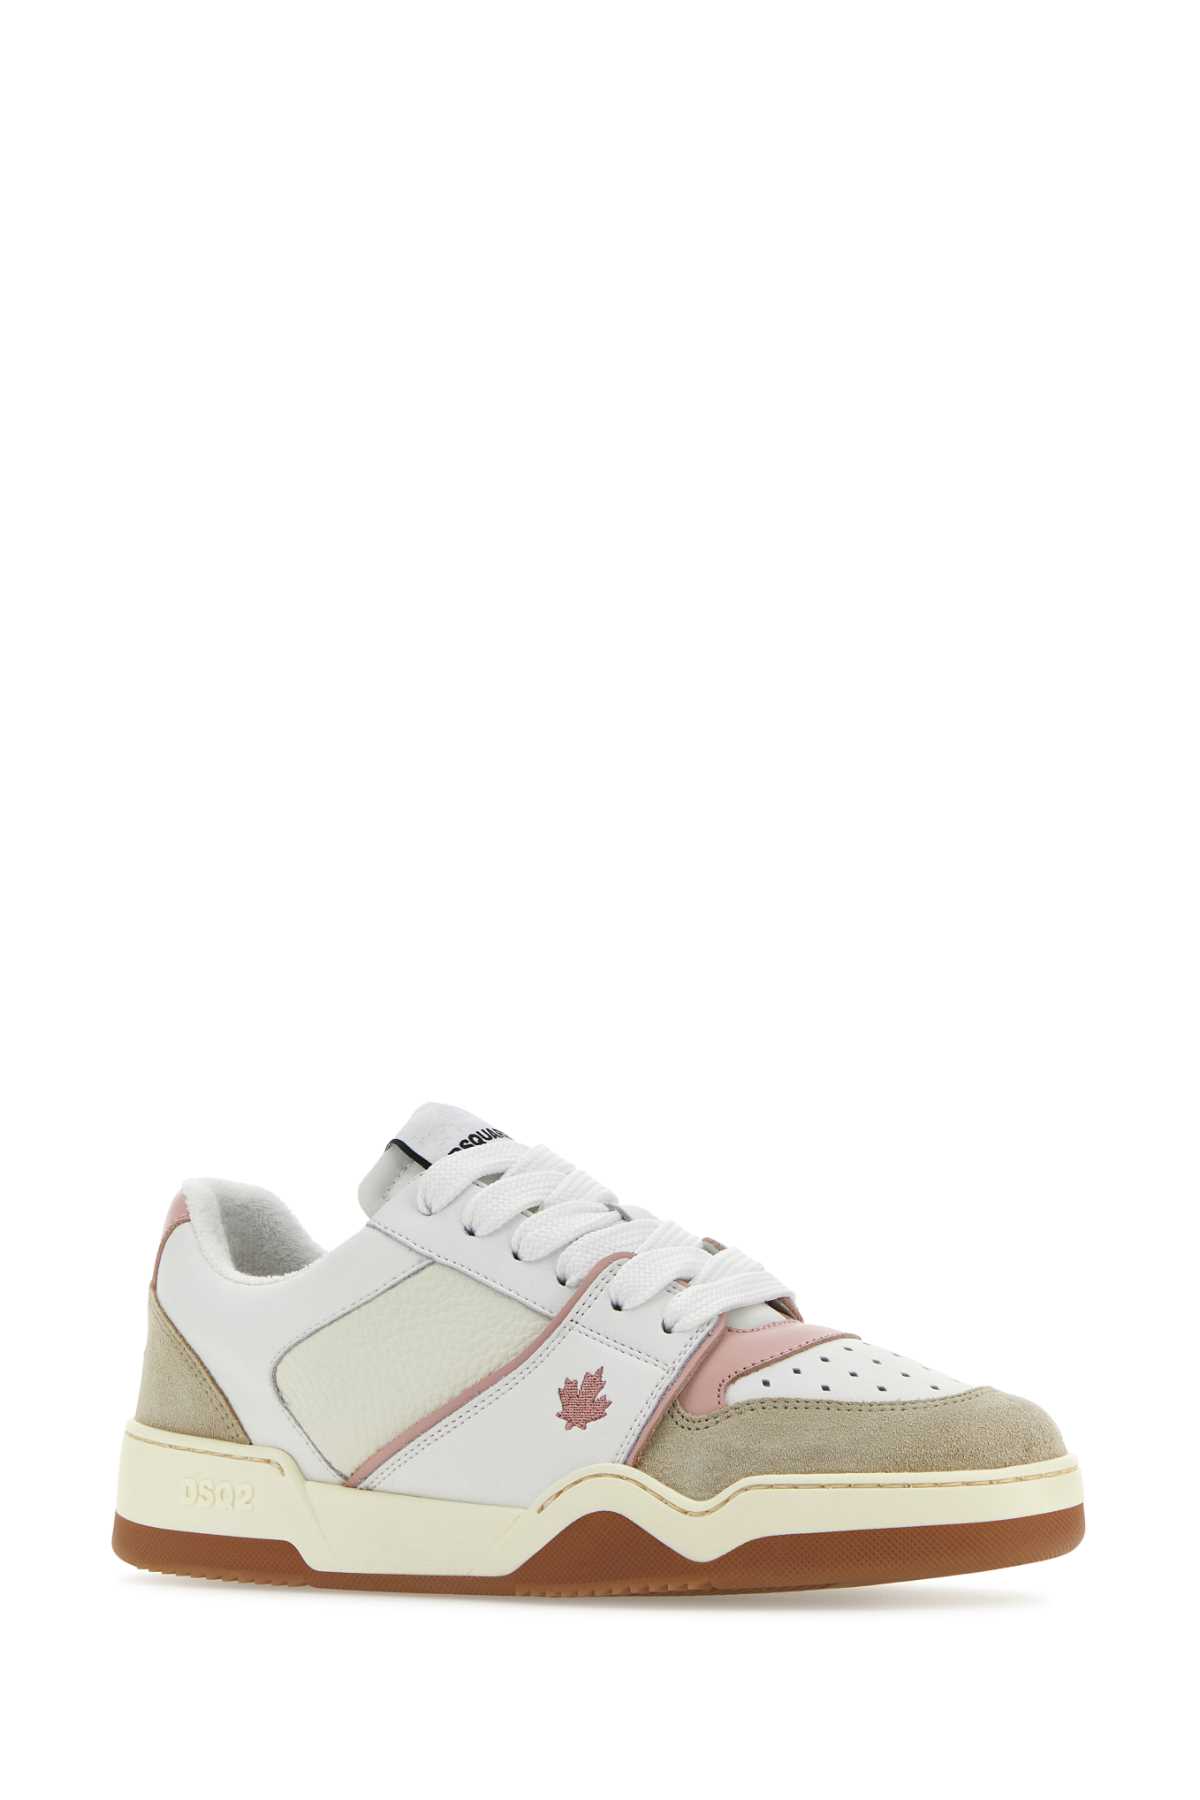 Dsquared2 Multicolor Leather And Suede Spiker Trainers In Whitebeigerose